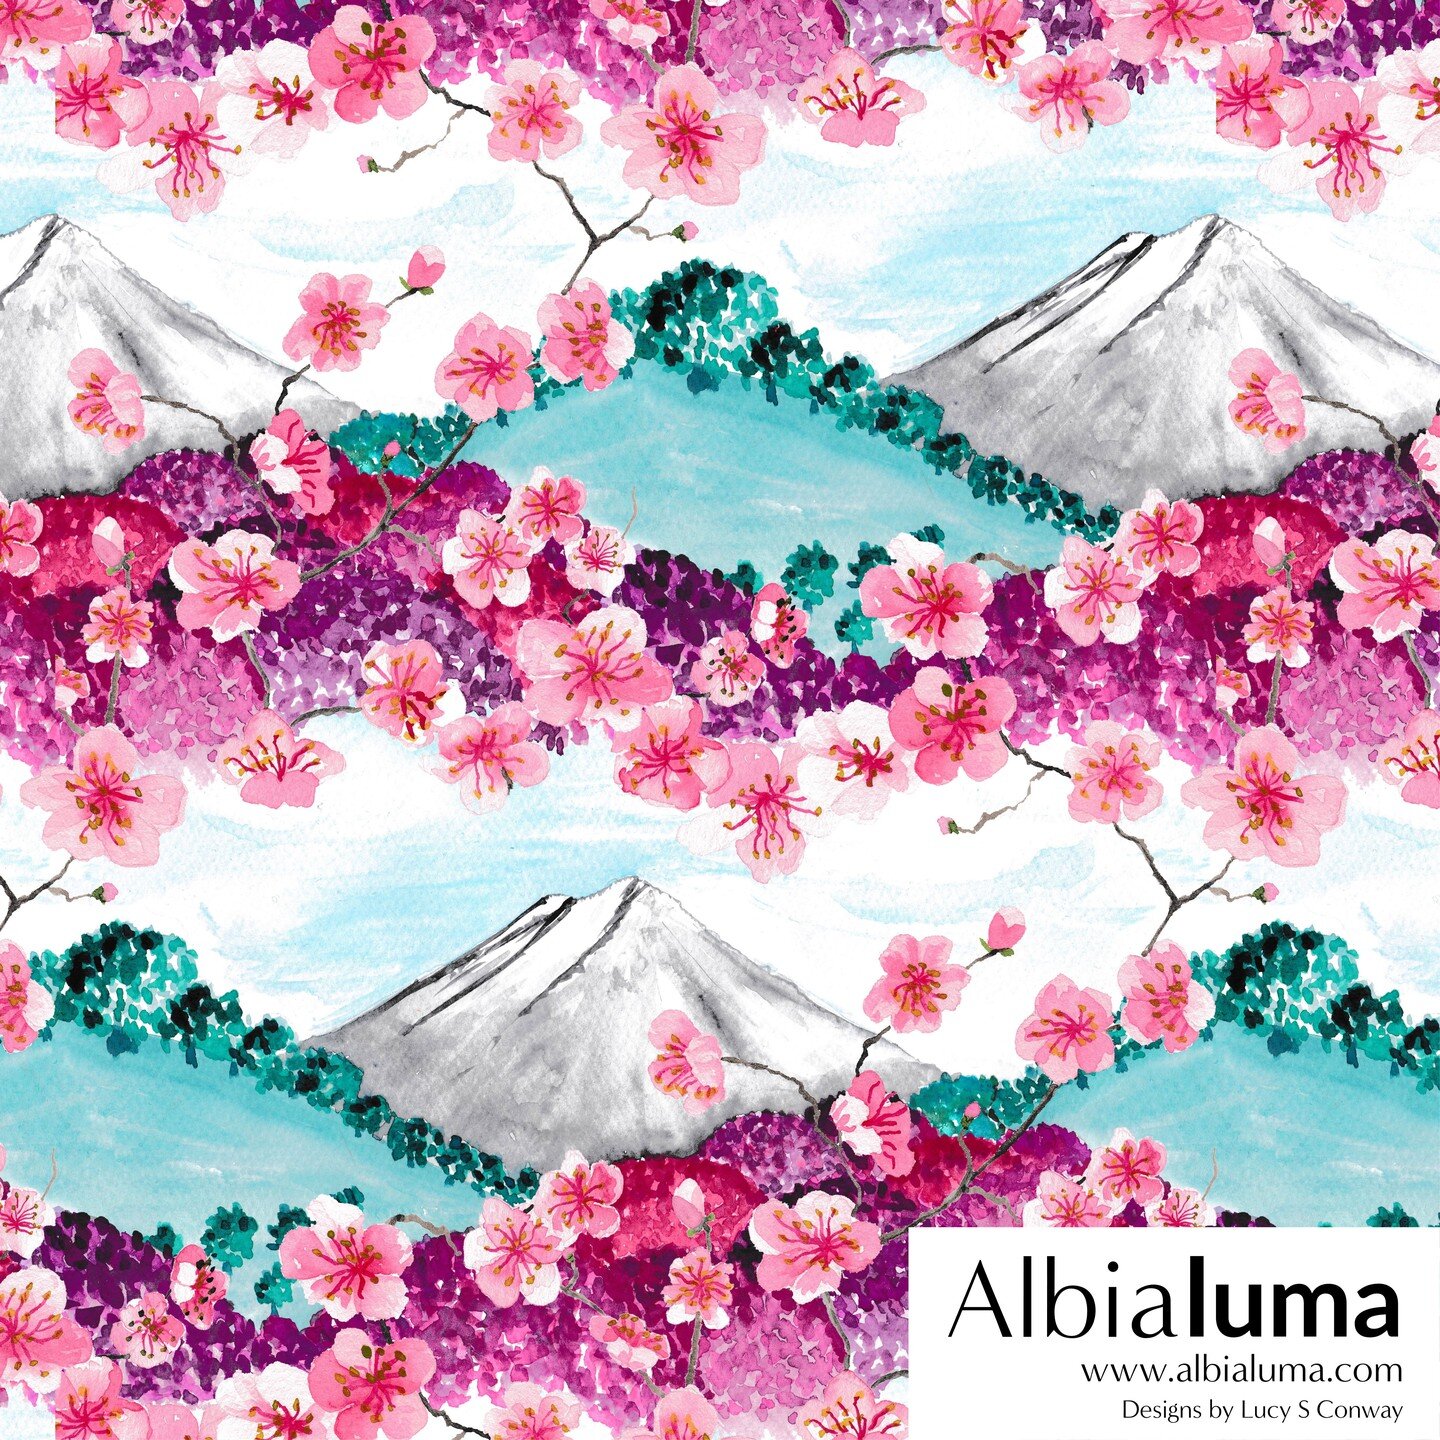 Mount Fuji. The sacred symbol of Japan. I would love to go and see it one day. Not the easiest motif to make a pattern from so I have combined sakura (cherry blossom) with my watercolour painting which I hope gives the design a sense of flow. This is